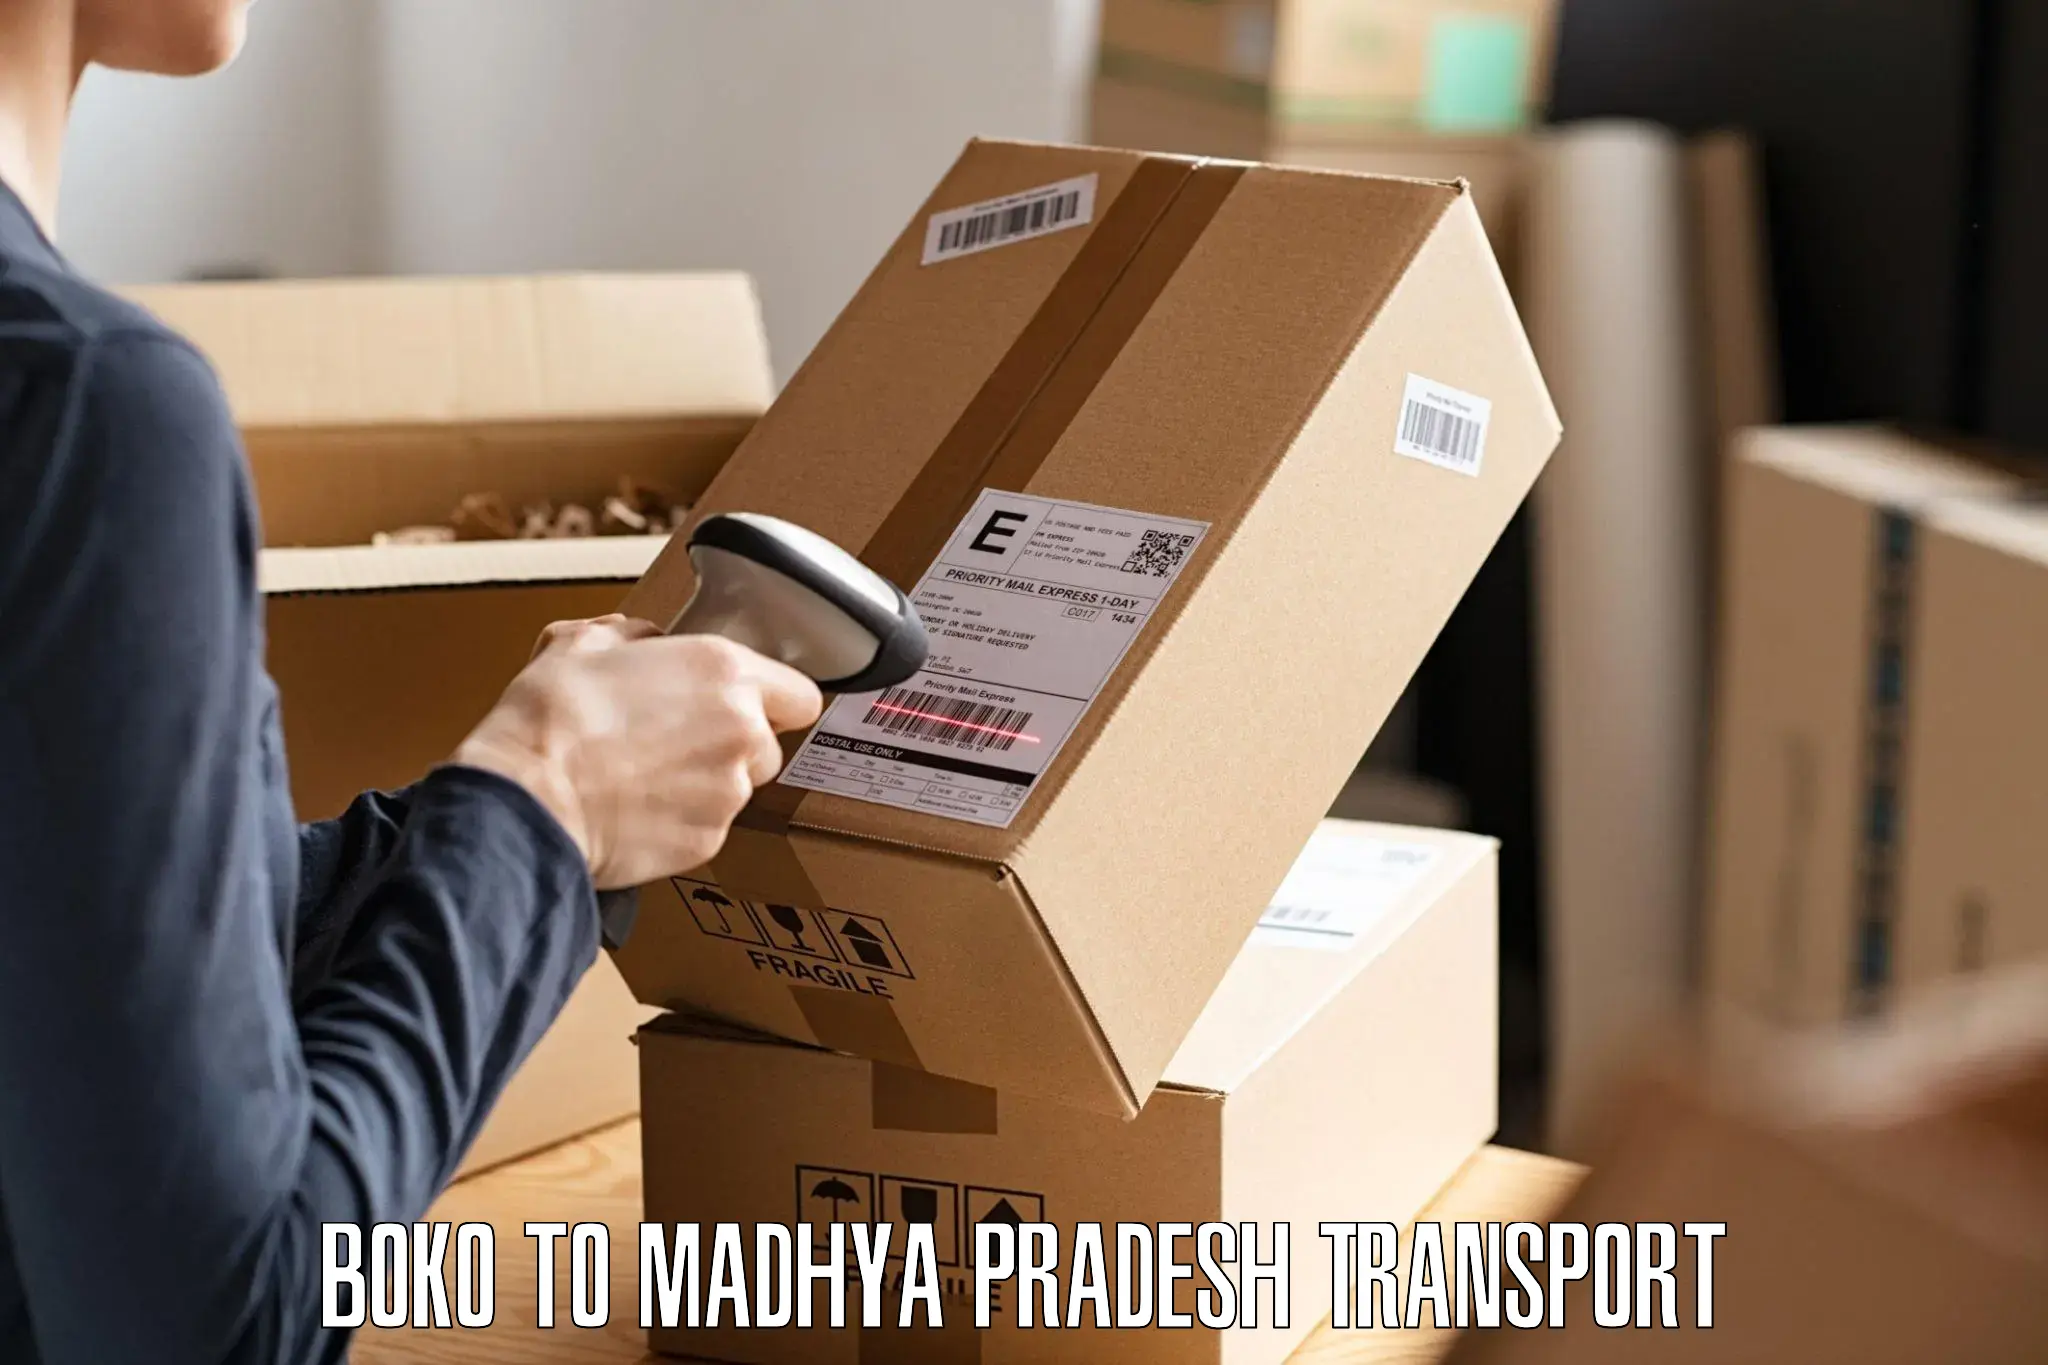 Furniture transport service in Boko to Bhopal